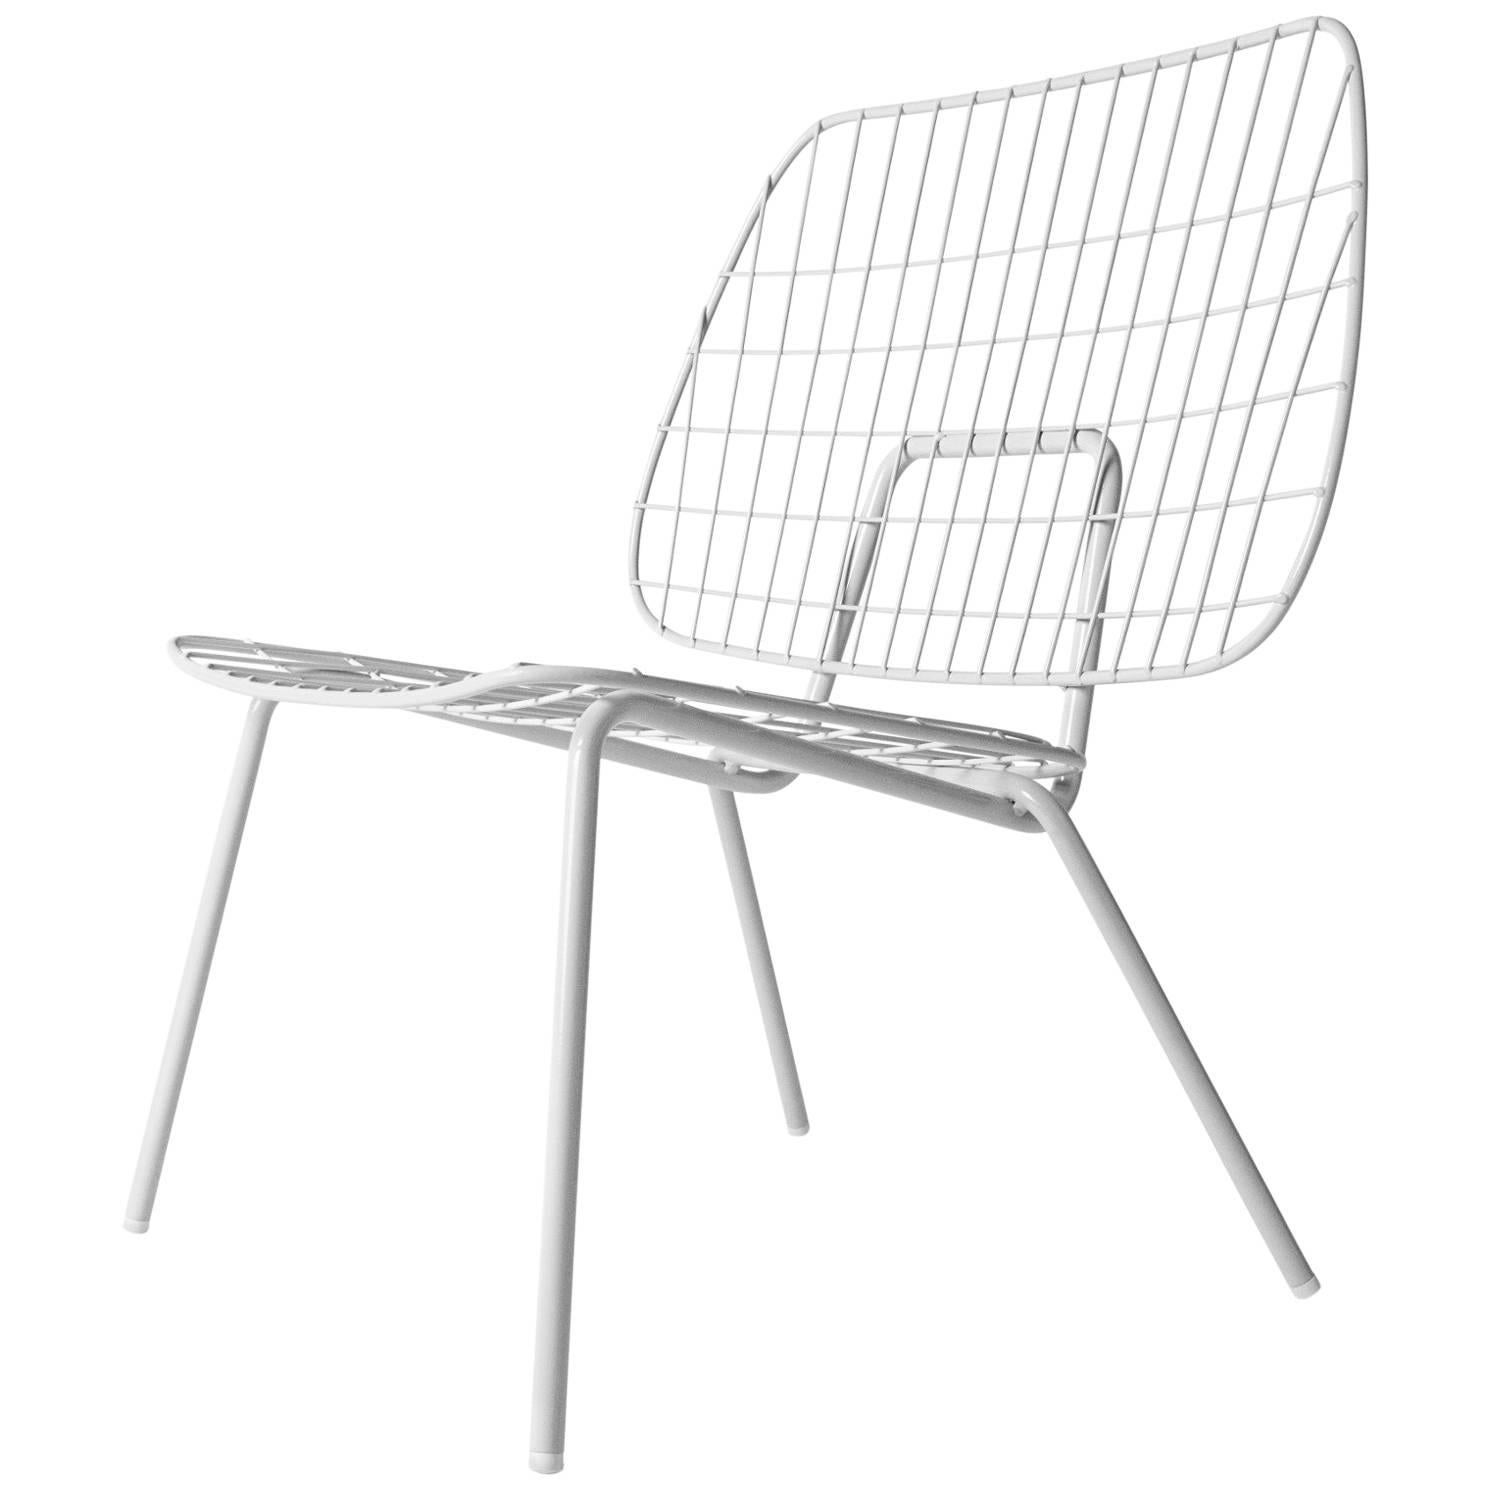 WM String Lounge Chair by Studio WM, in Two-Pack, White Steel Frame